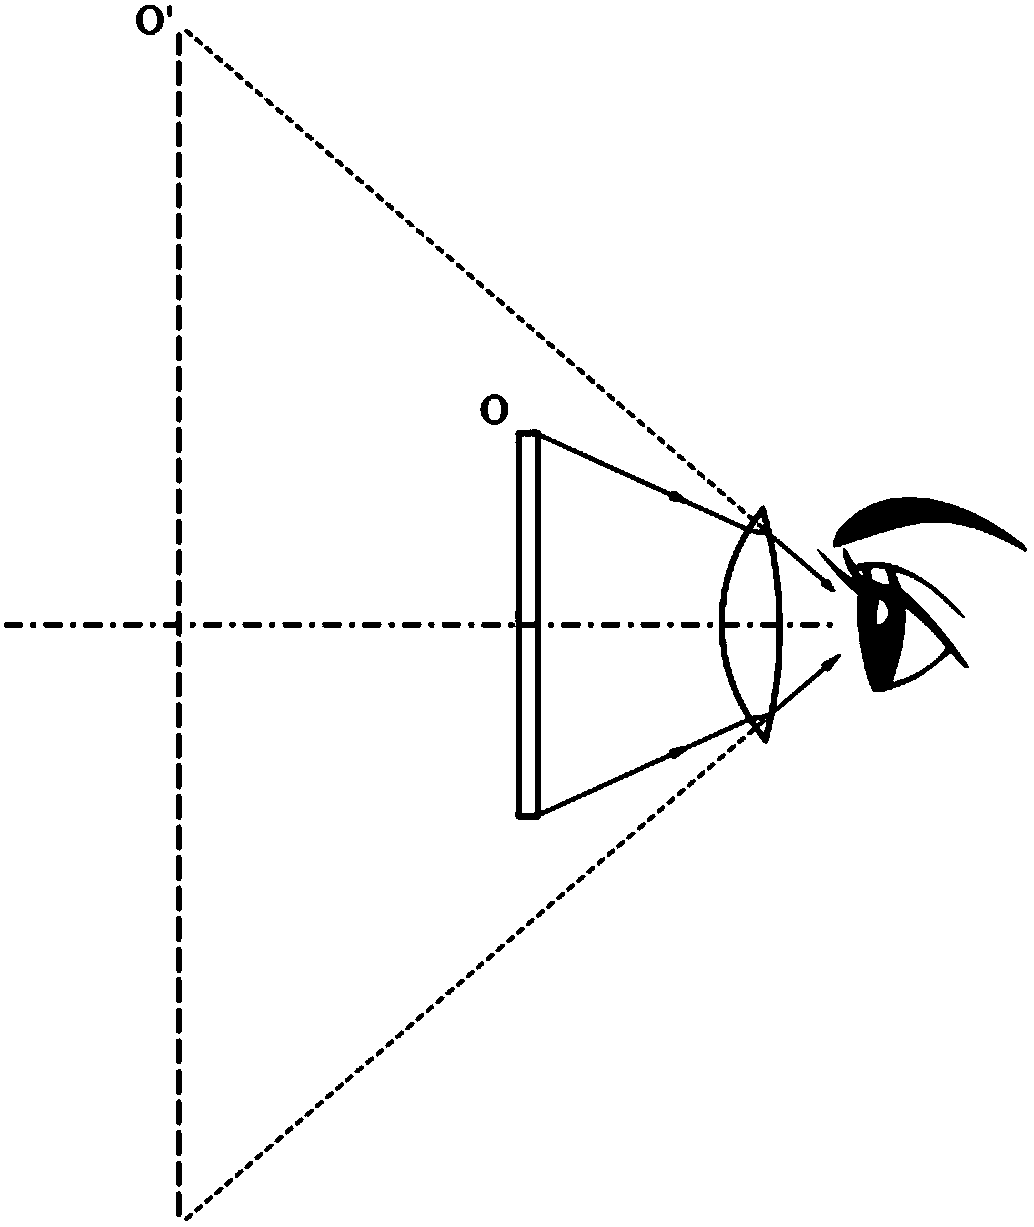 All-sight image display device